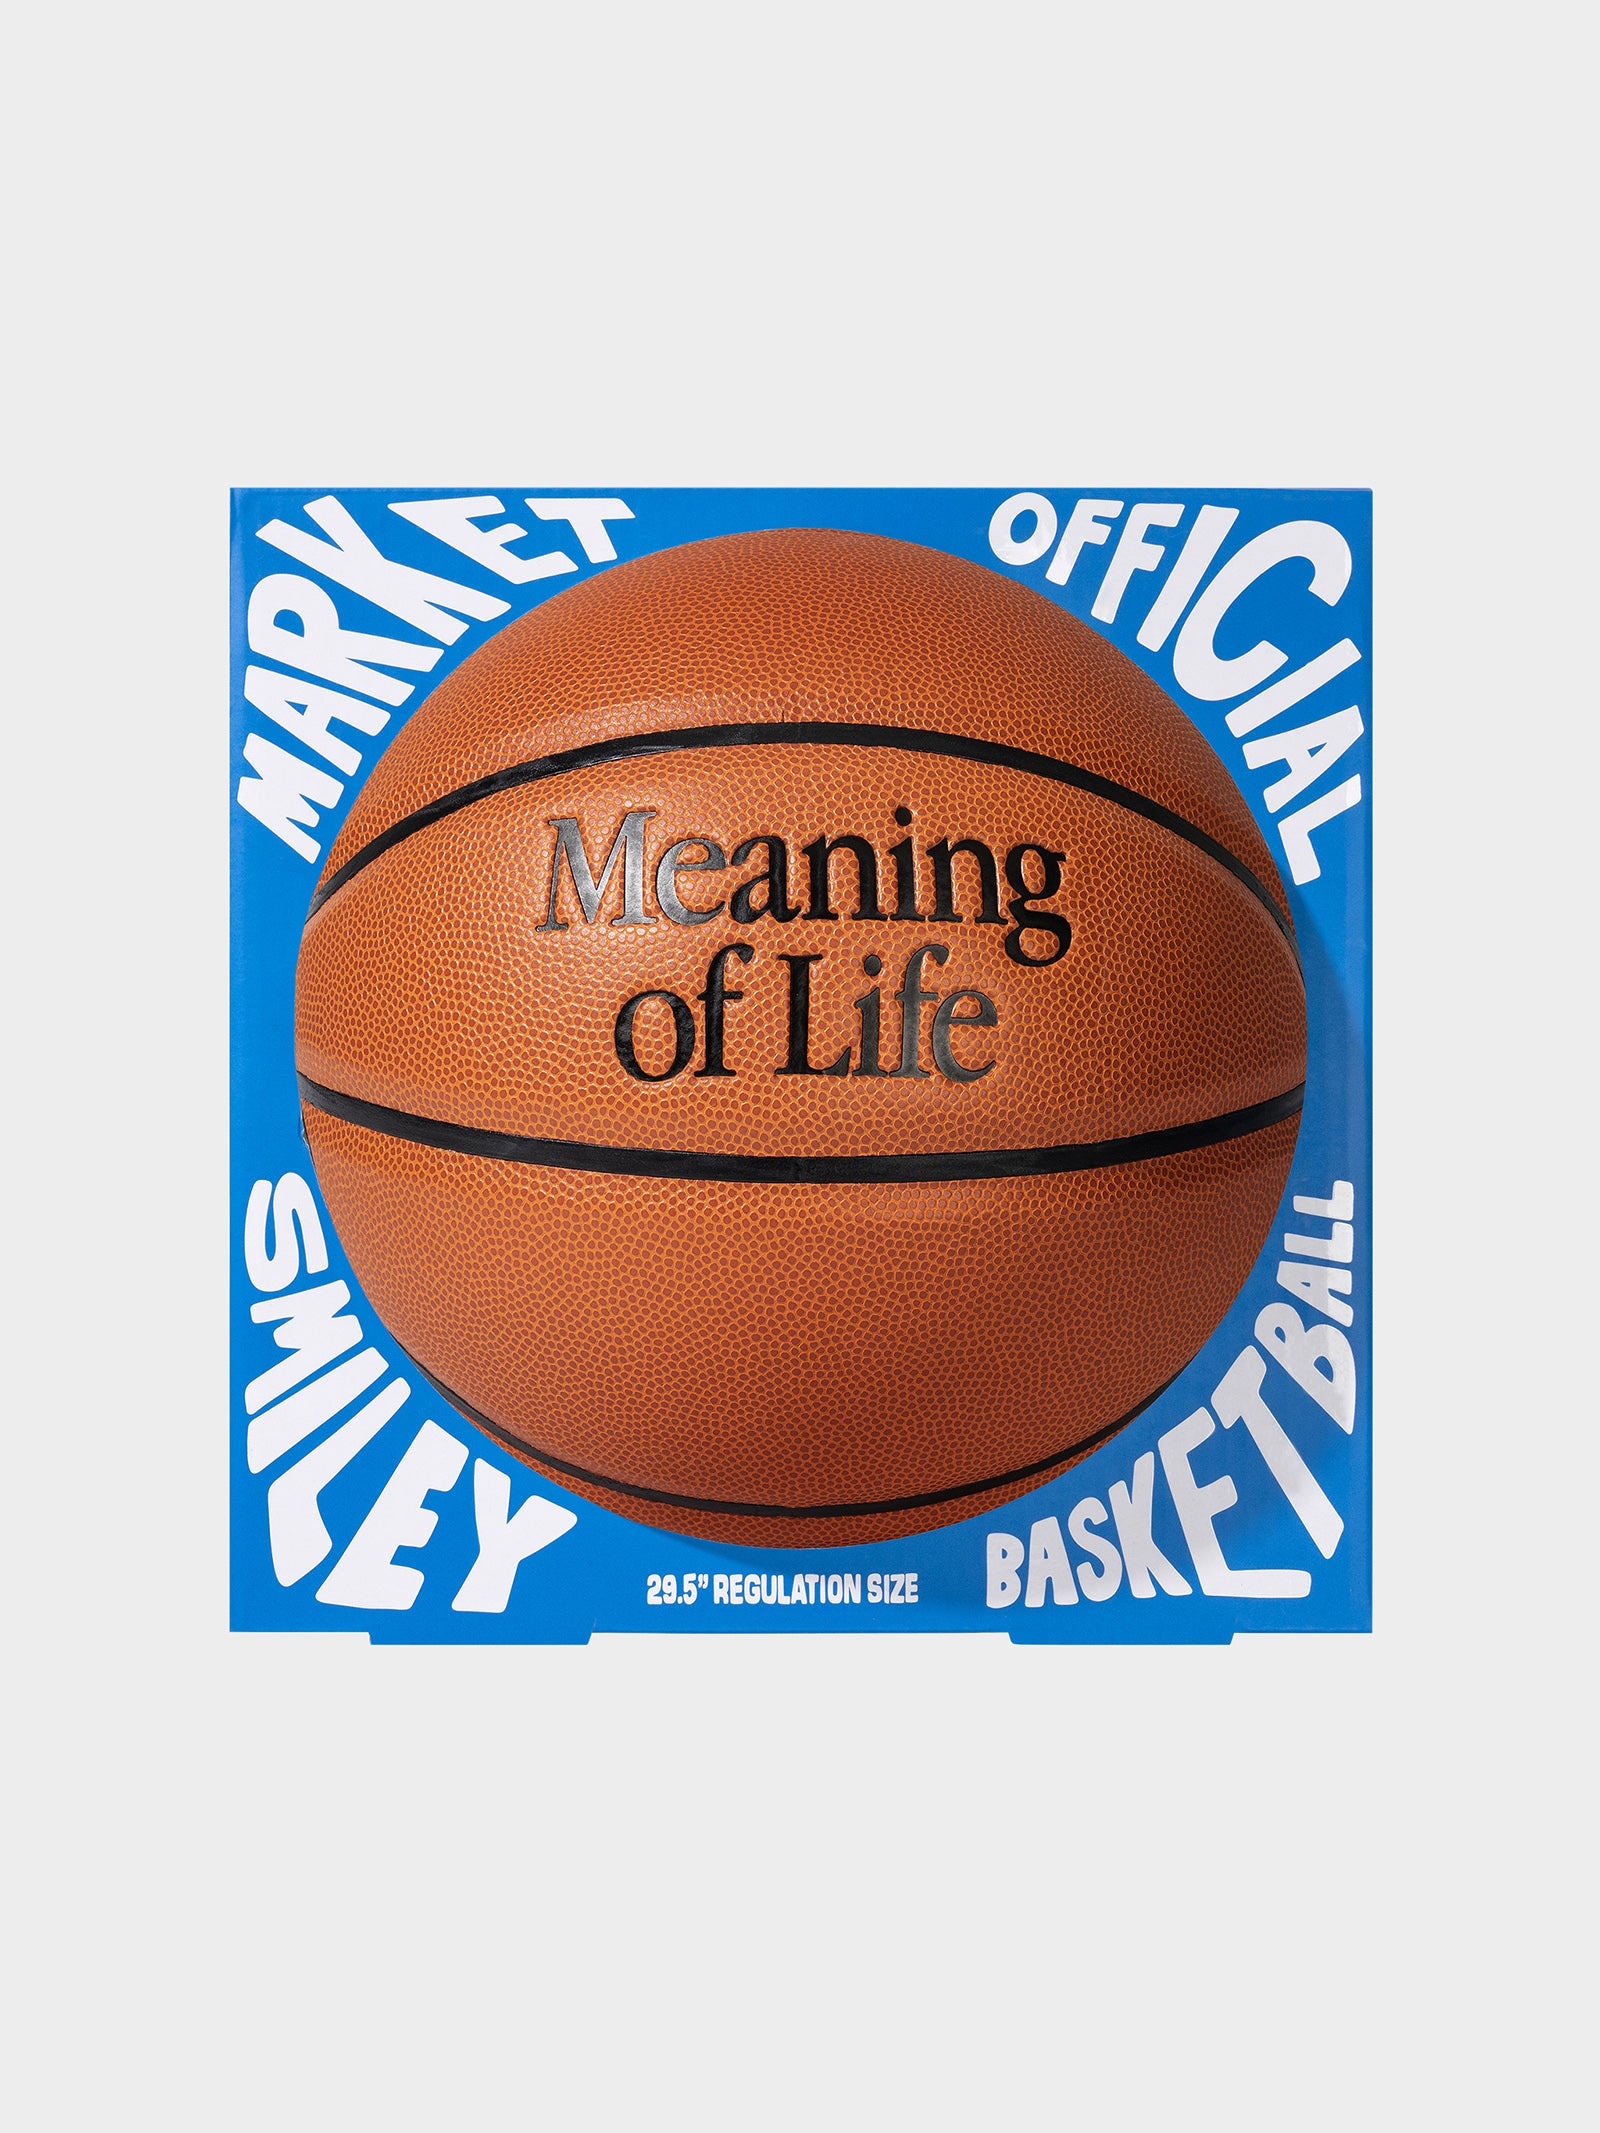 Meaning Of Life Basketball in Orange